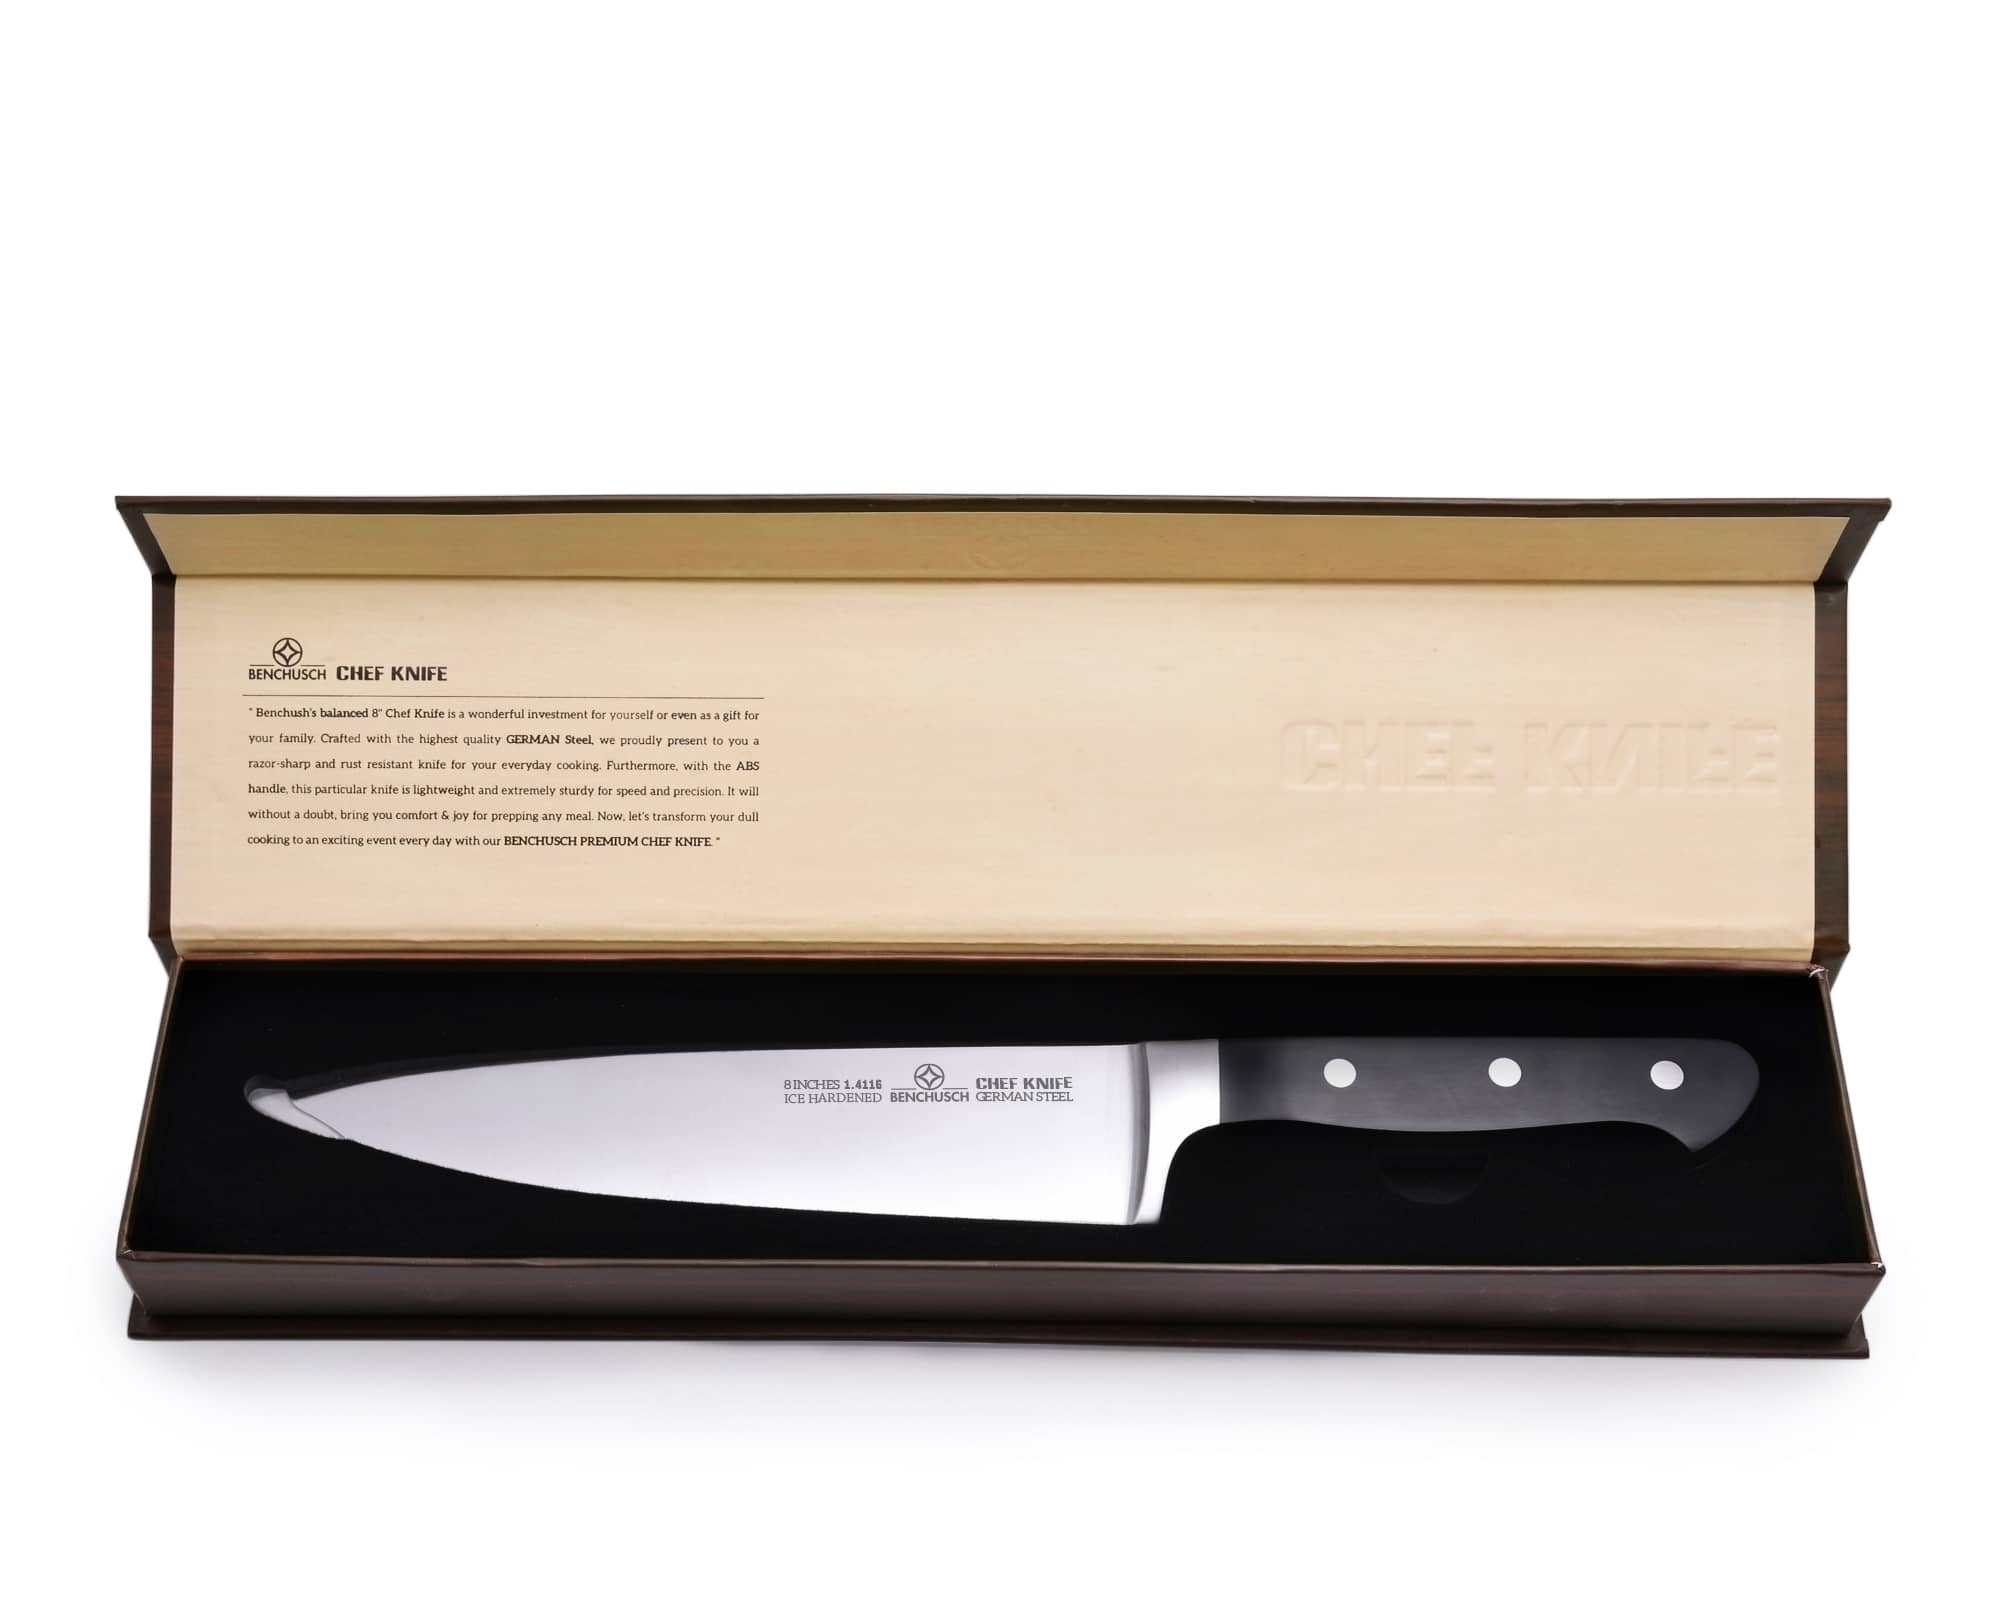 Benchusch Professional 8-Inch Chef Knife with opened elegant box